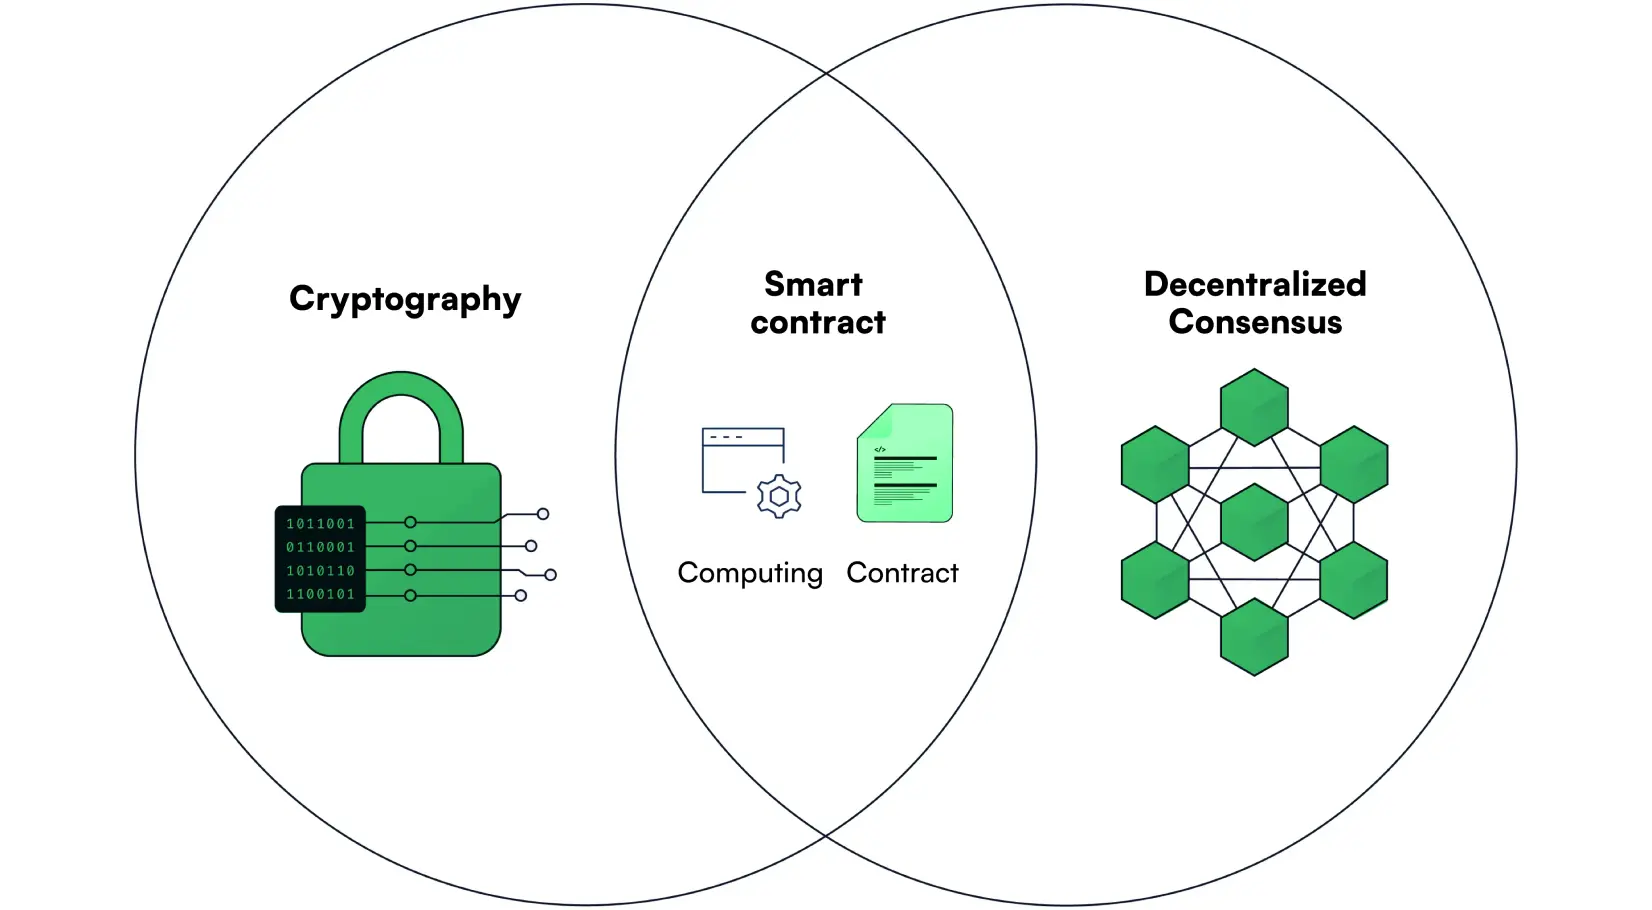 Three key components of the blockchain: cryptography, smart contract and decentralized consensus